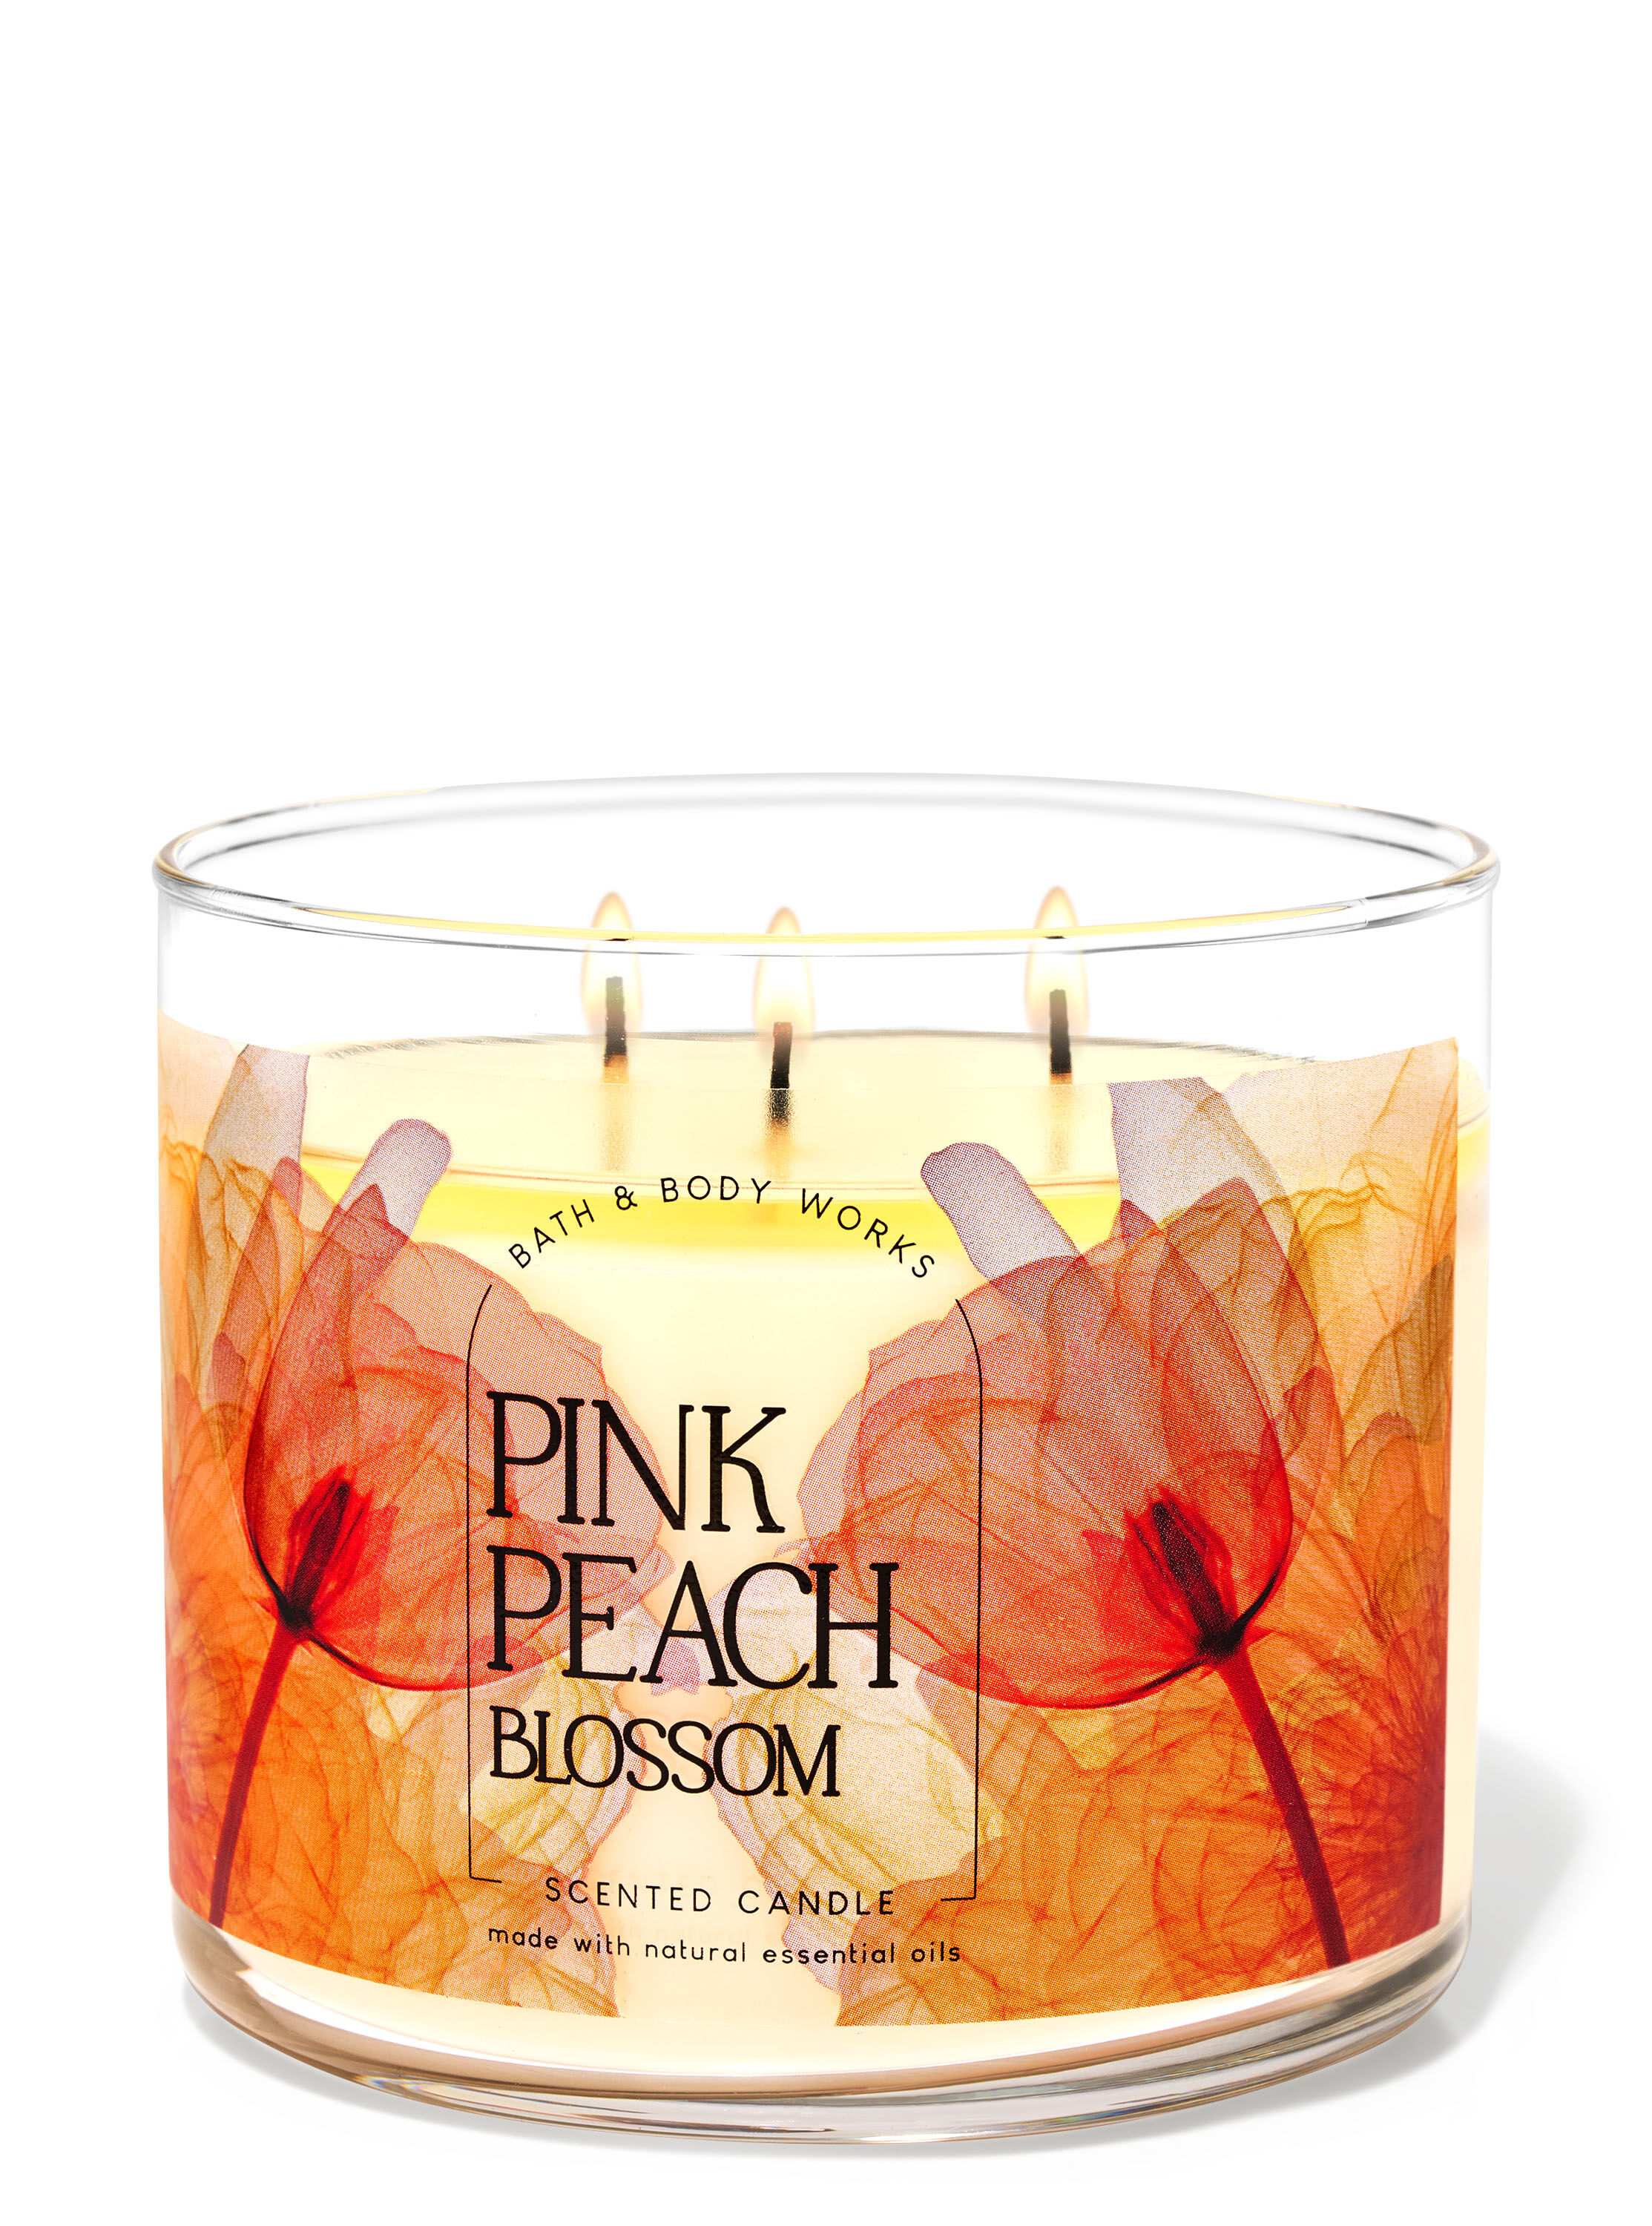 Pink Peach Blossom 3-Wick Candle